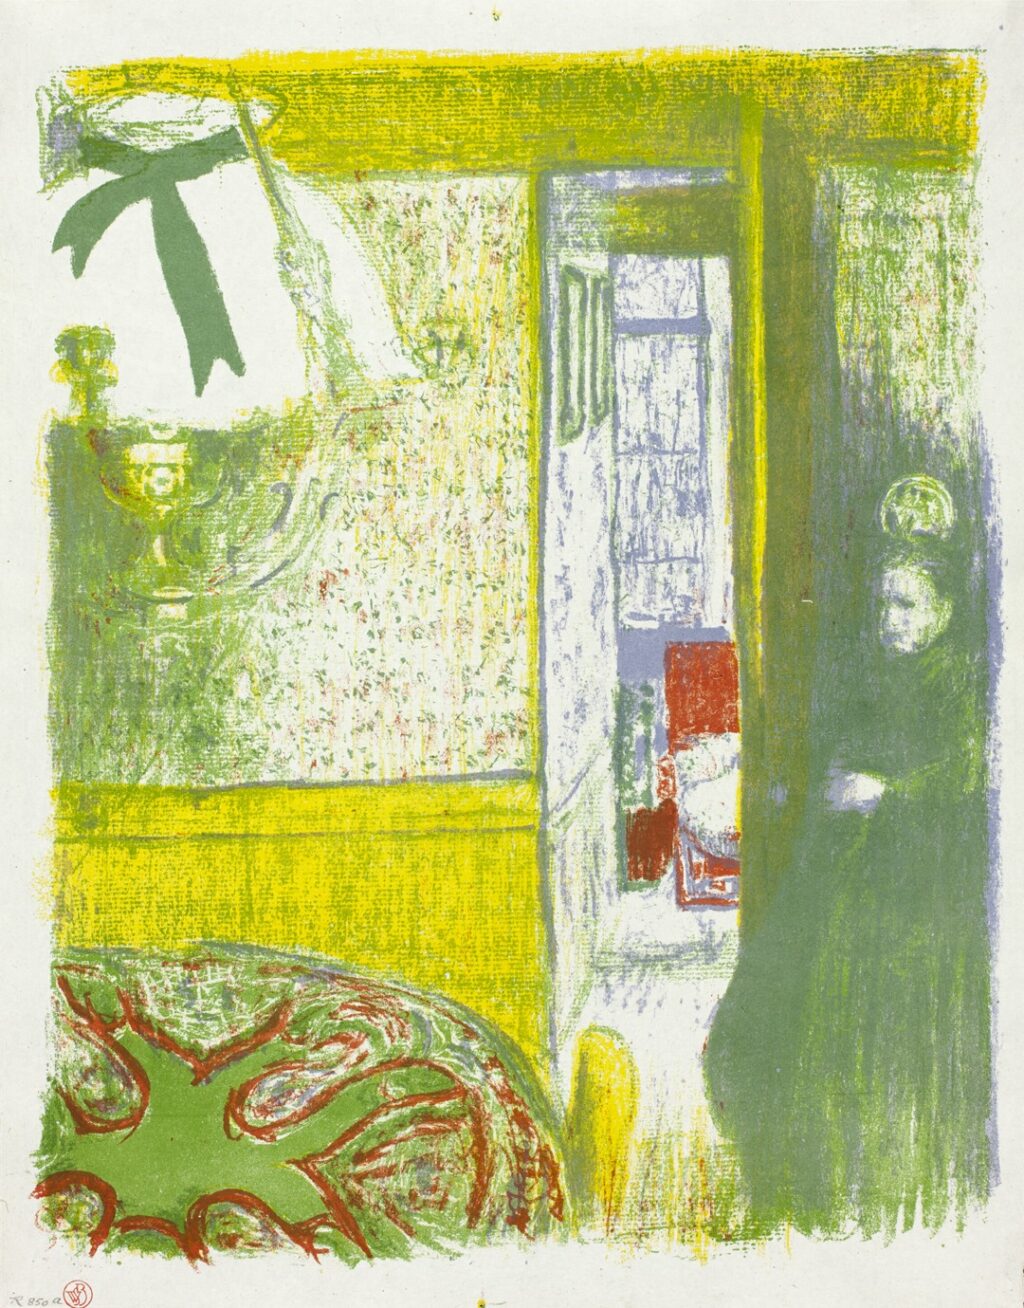 2. Edouard Vuillard, Interior with Hanging Lamp. The view in this lithograph is a dining room scene made of yellow, green, red and purple inks. There is a ceiling lamp in the upper left corner that is very prominent. It has a bright white bell shaped glass shade with a black ribbon tied around the smallest part at the top that drapes down the shade. Some of the metal hardware is also depicted, the hardware from above and the half circle lamp portion below the shade. The light is illuminating a portion of the room, the center of the lithograph. On the walls in the dining room is yellow wainscoting and white wallpaper with a small print. In the lower left is a green tablecloth with some red lines creating a decorative table linen. There is an open door leading to another room that has some undecipherable things in it that are purple (maybe windows) and something red with white (maybe a chair with a blanket). On the far right of the lithograph, on the other side of the open door is a woman in the shadows. All you can see of her is her white face and hand as her dark green dress blends into the walls. She is looking directly at the viewer.